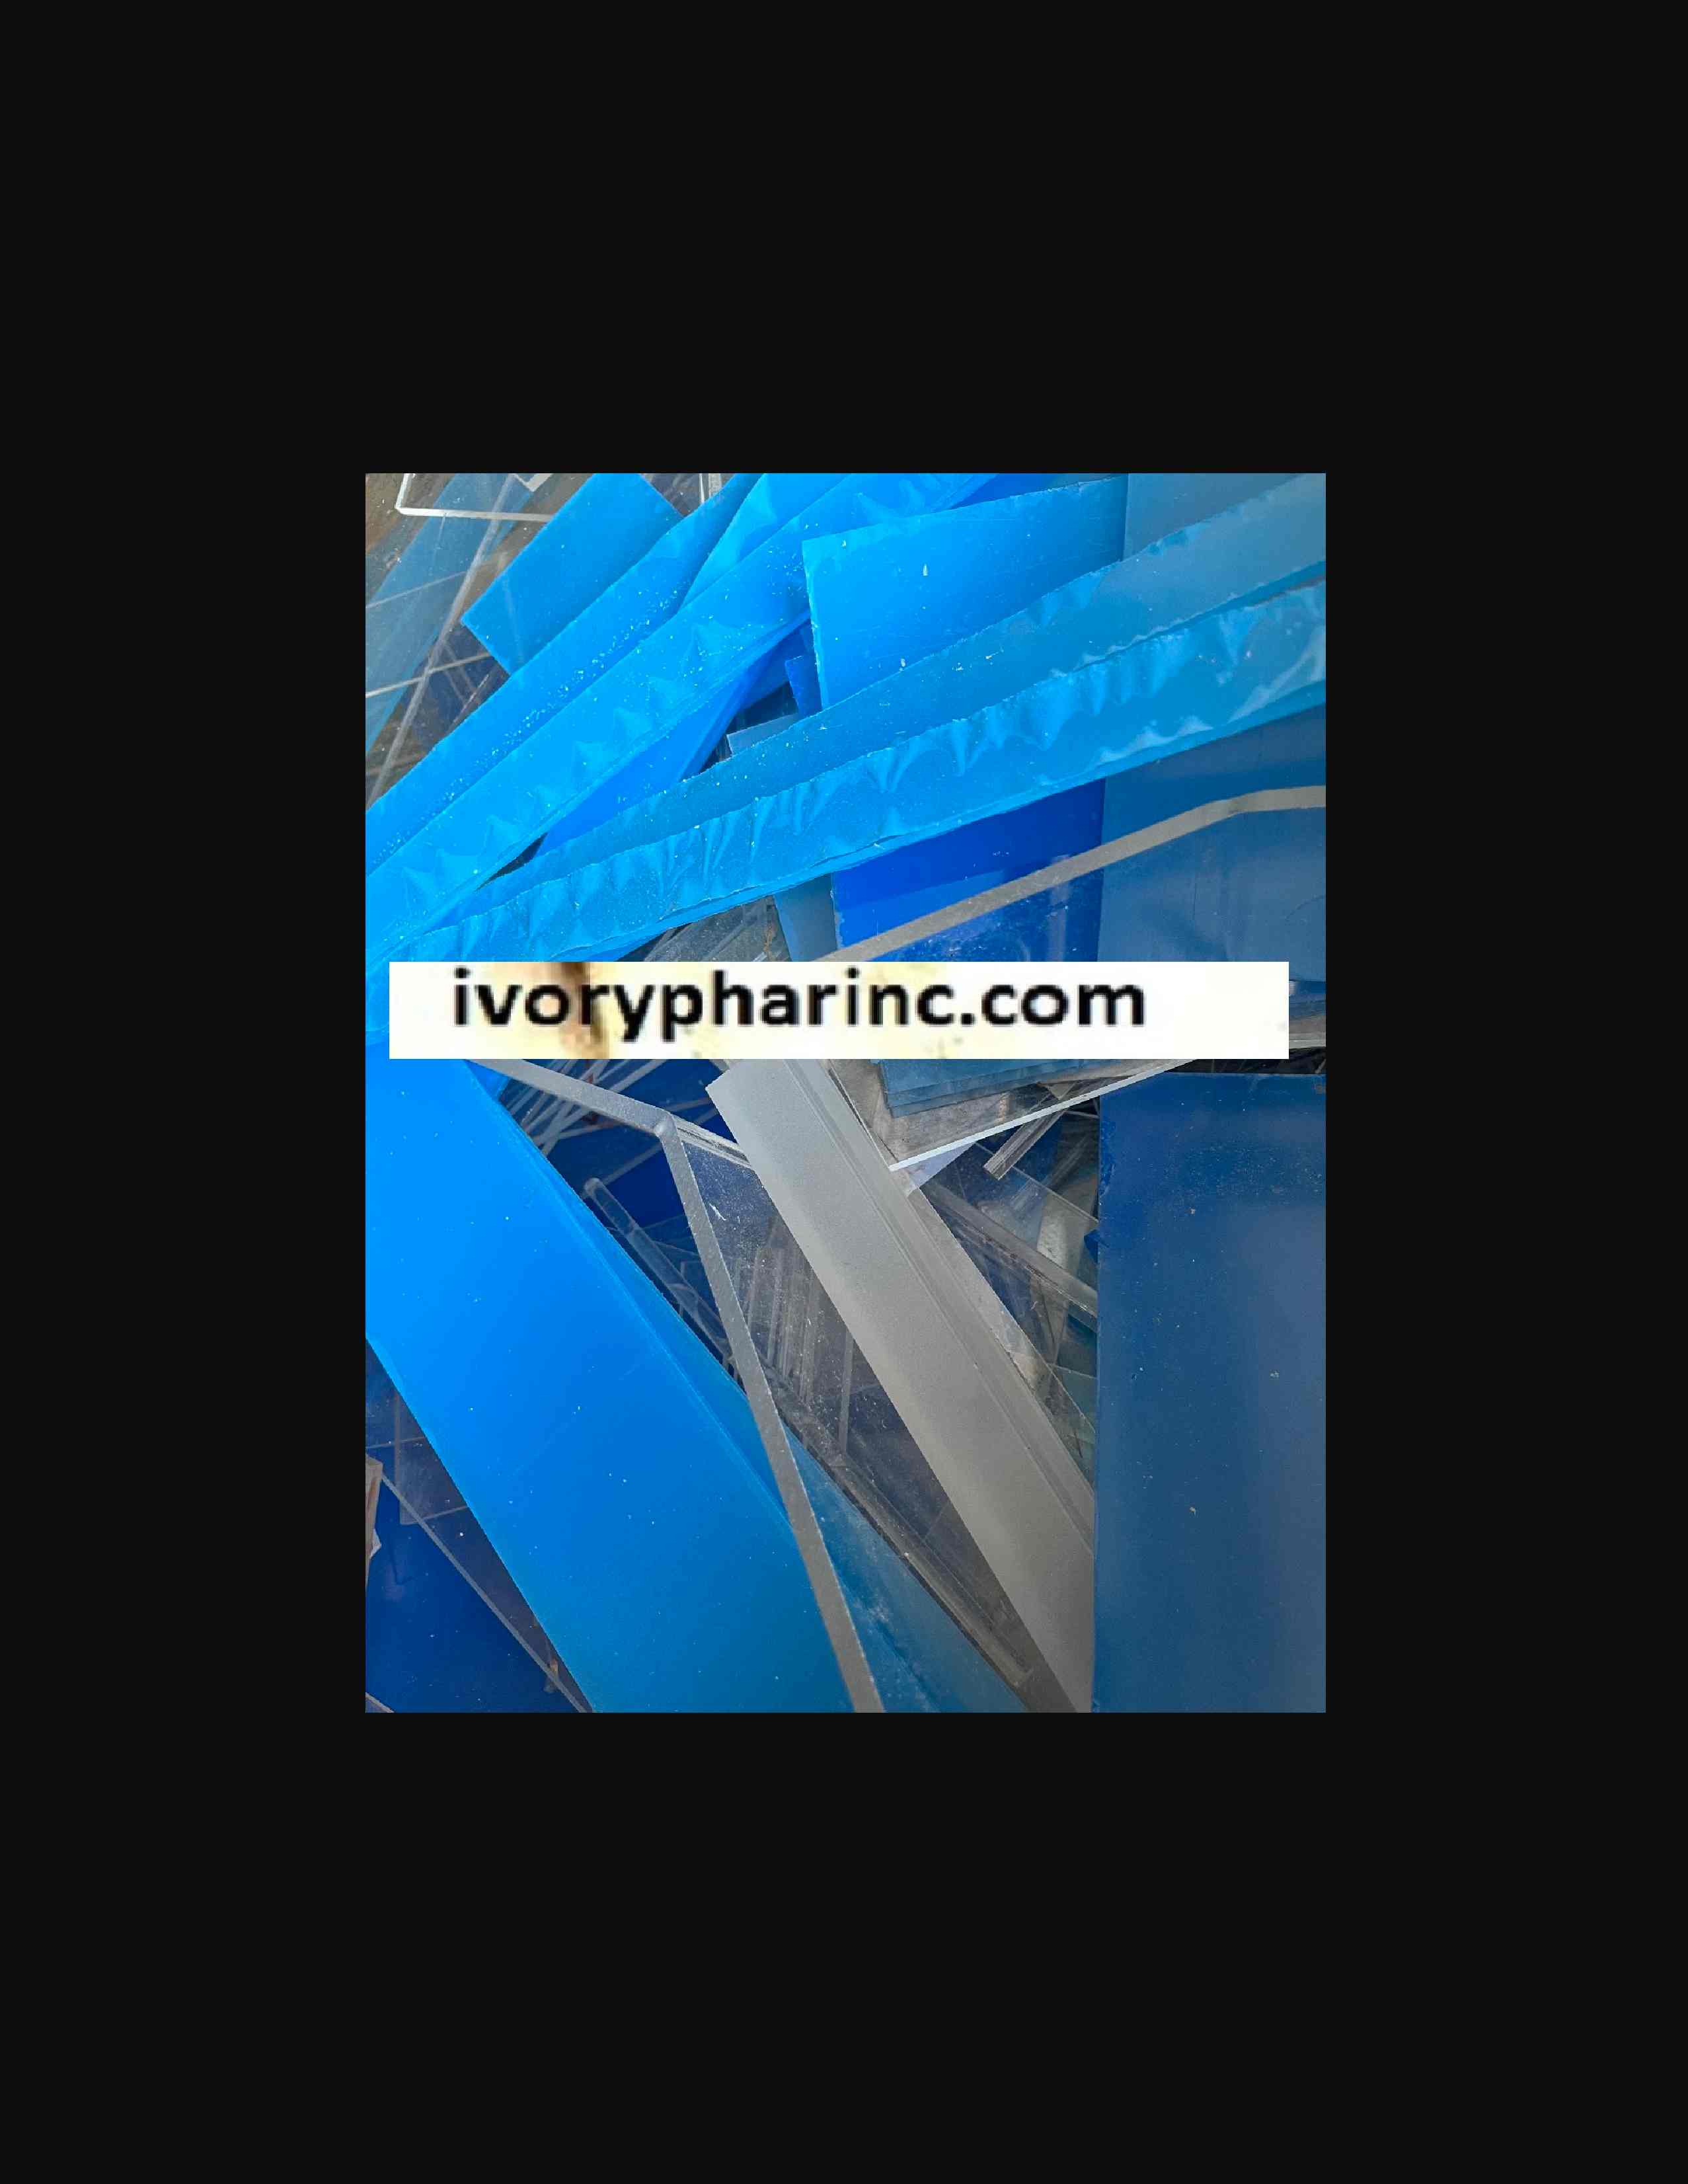 Acrylic Plastic Scrap For sale, PMMA Sheet, Offcuts, Regrind, Prime